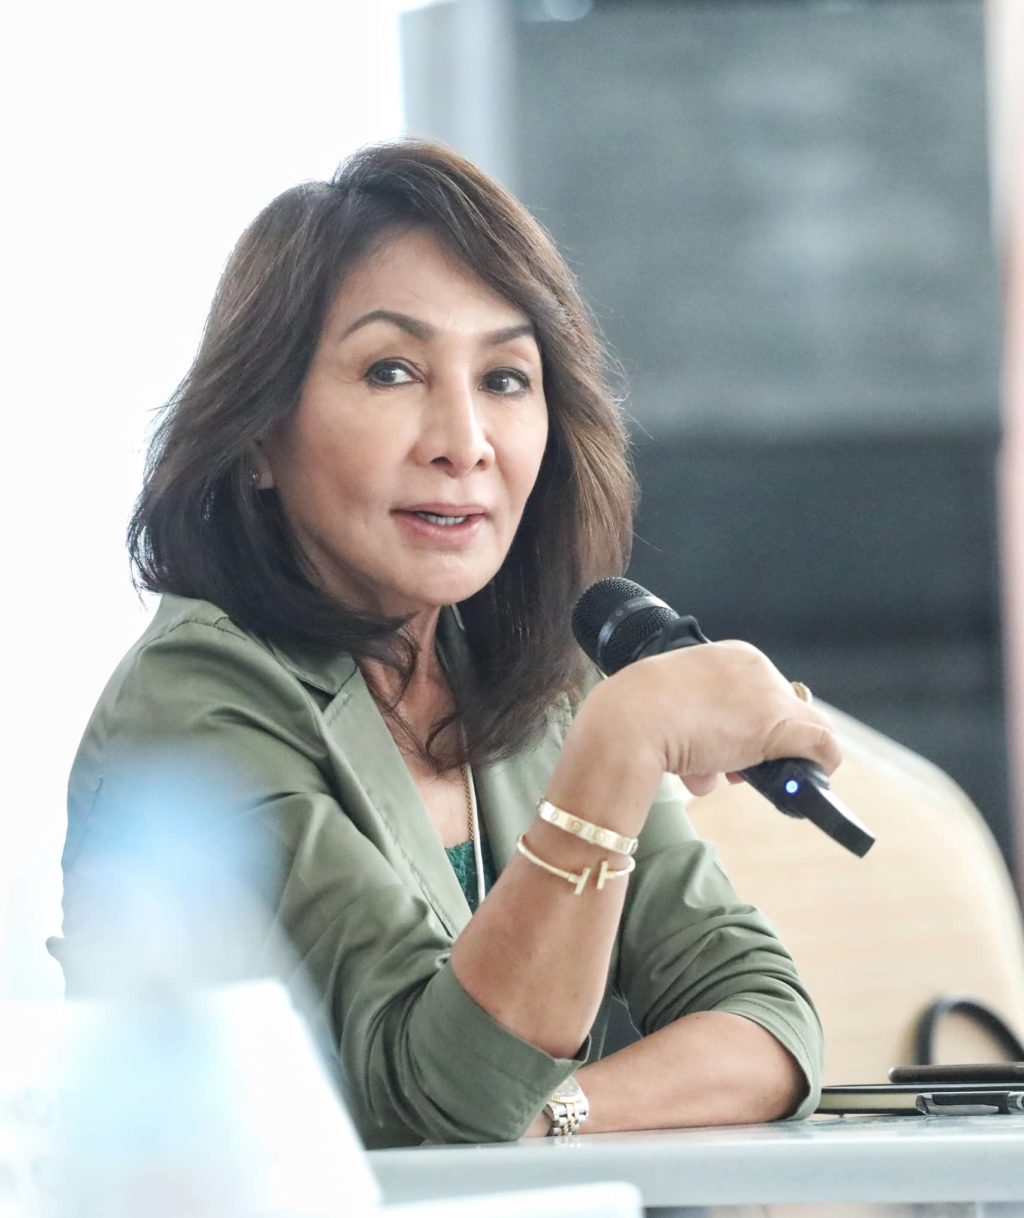 Gwen not keen on ‘whole-of-nation’ rule for testing returning overseas Filipinos